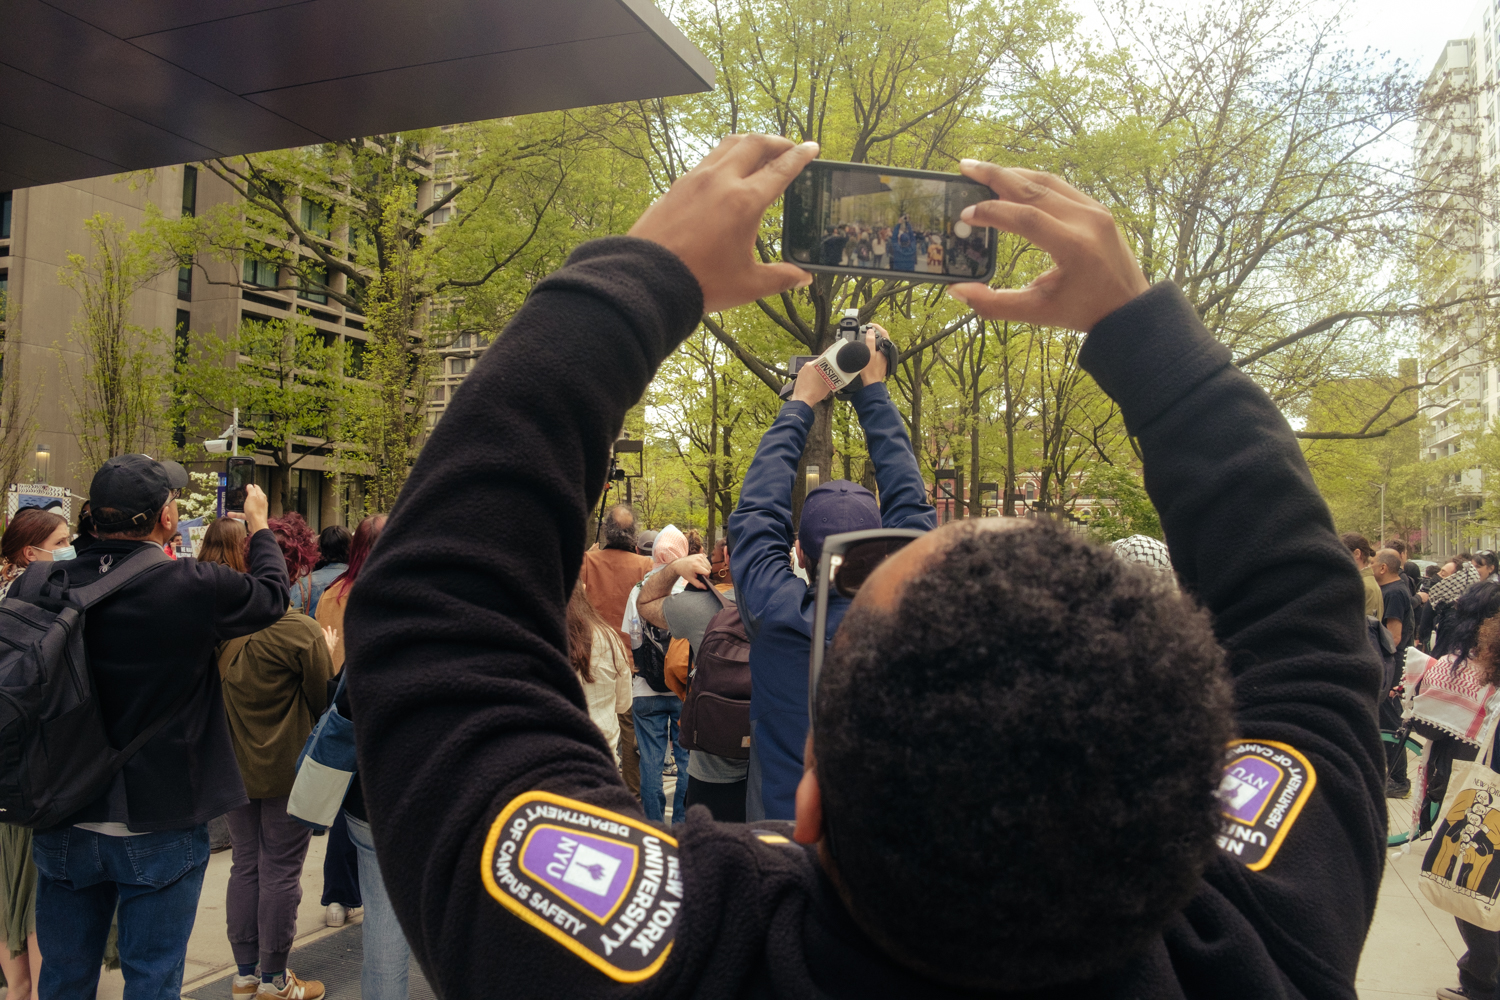 A Campus Safety officer takes a photo of a cameraman filming the encampment.